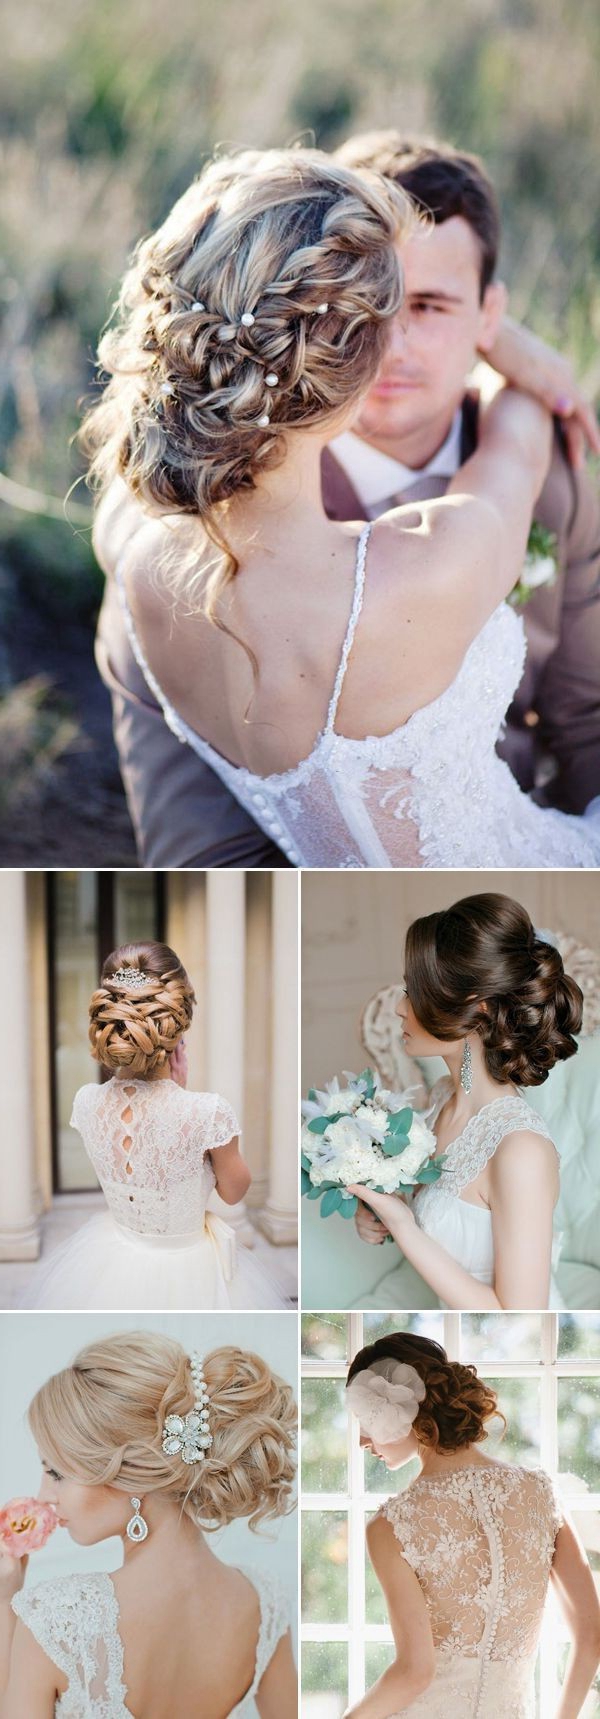 long-updo-wedding-hairstyles-for-every-bride-from-elstile